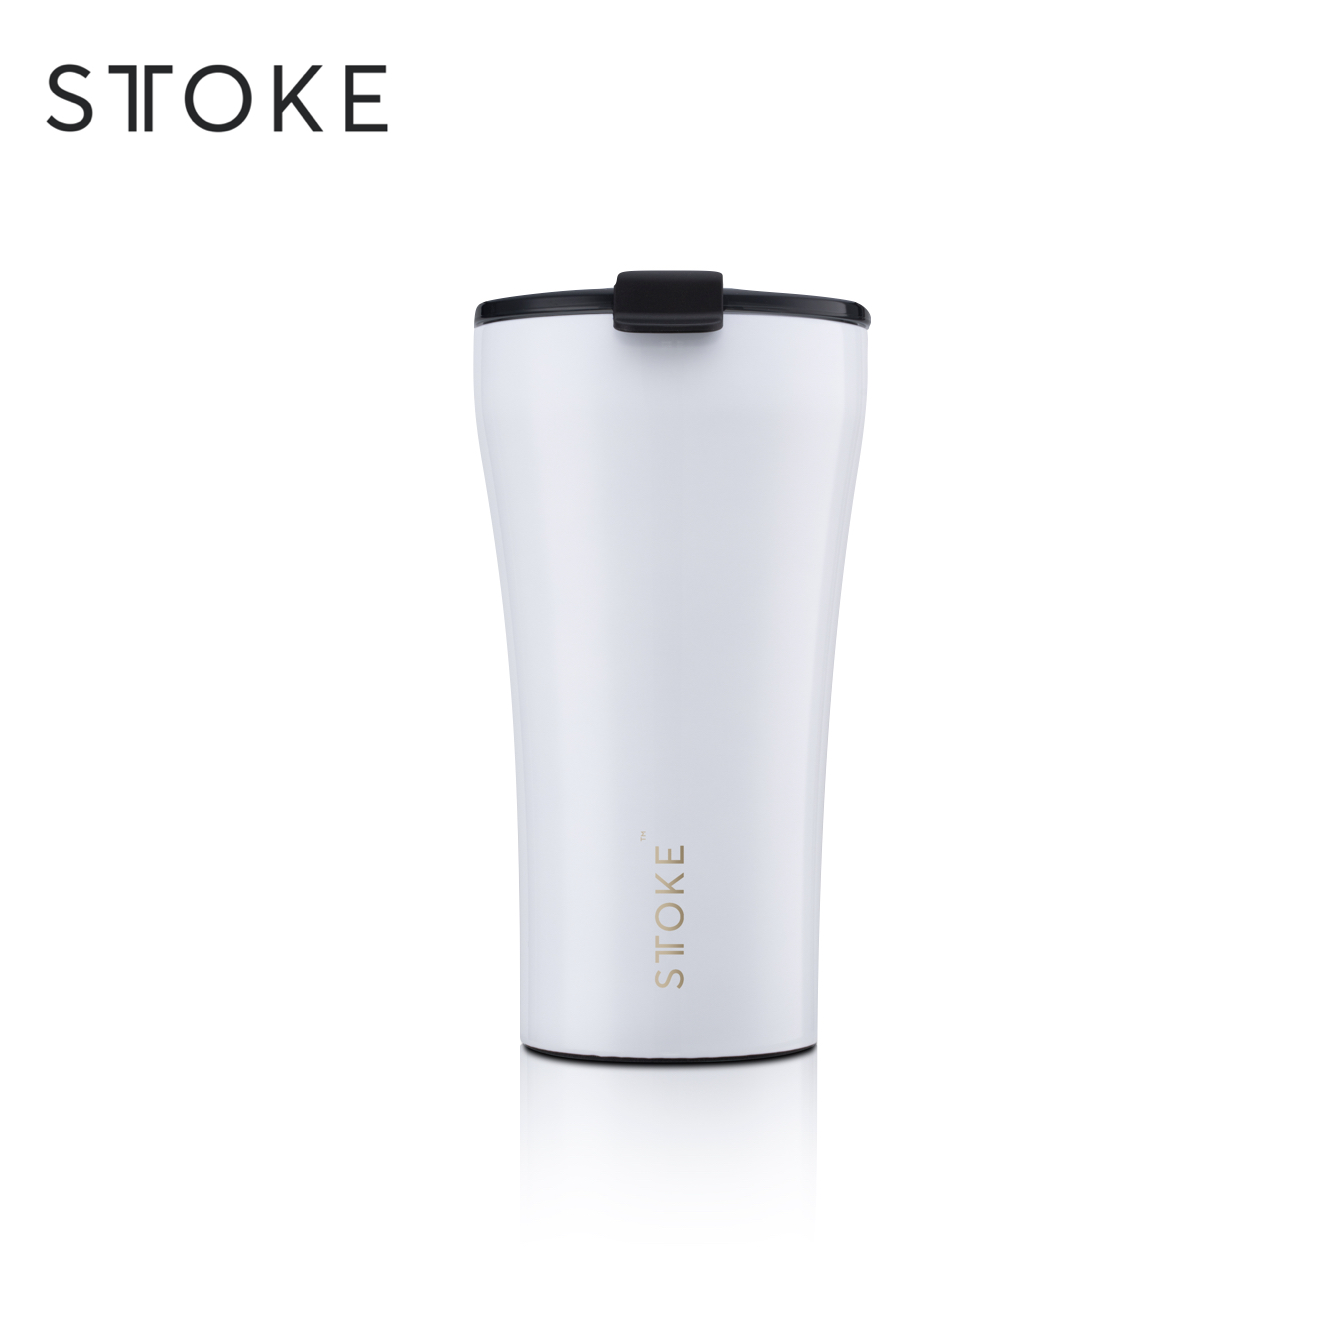 Sttoke Leakproof Ceramic Cup 16 oz - Angel White